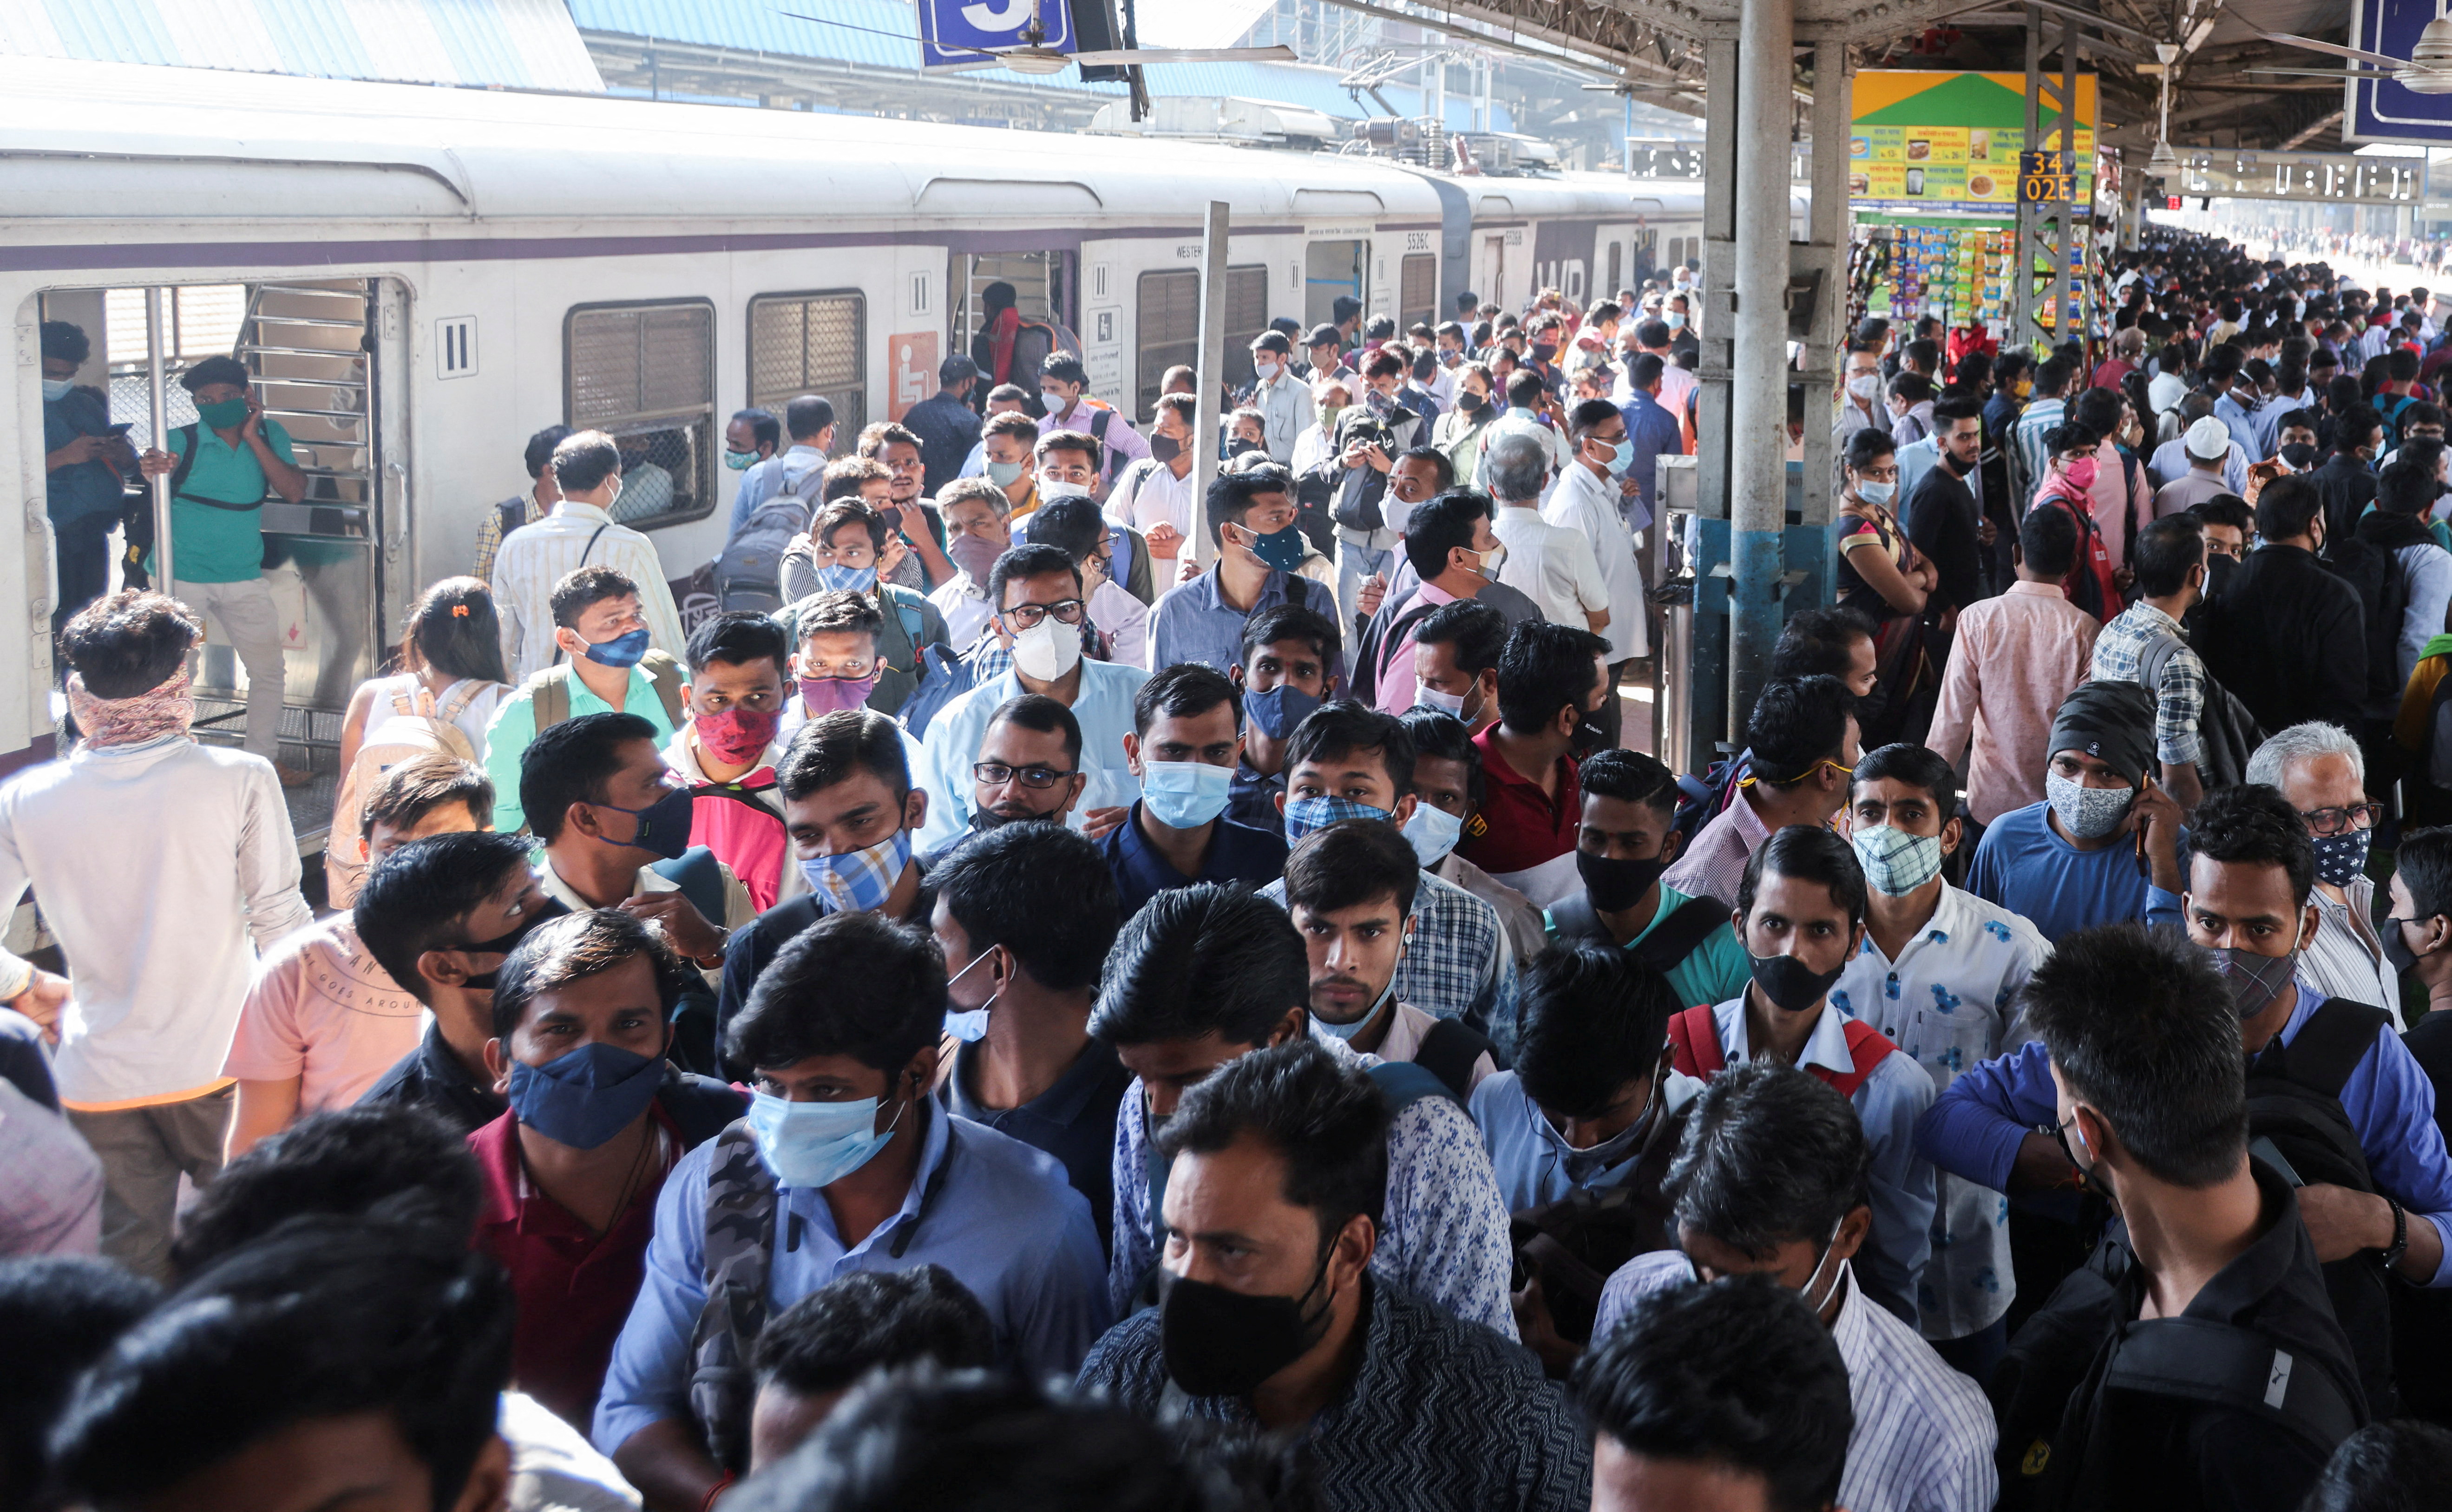 Commuters walk on a platform after disembarking from a train at a railway station in Mumbai